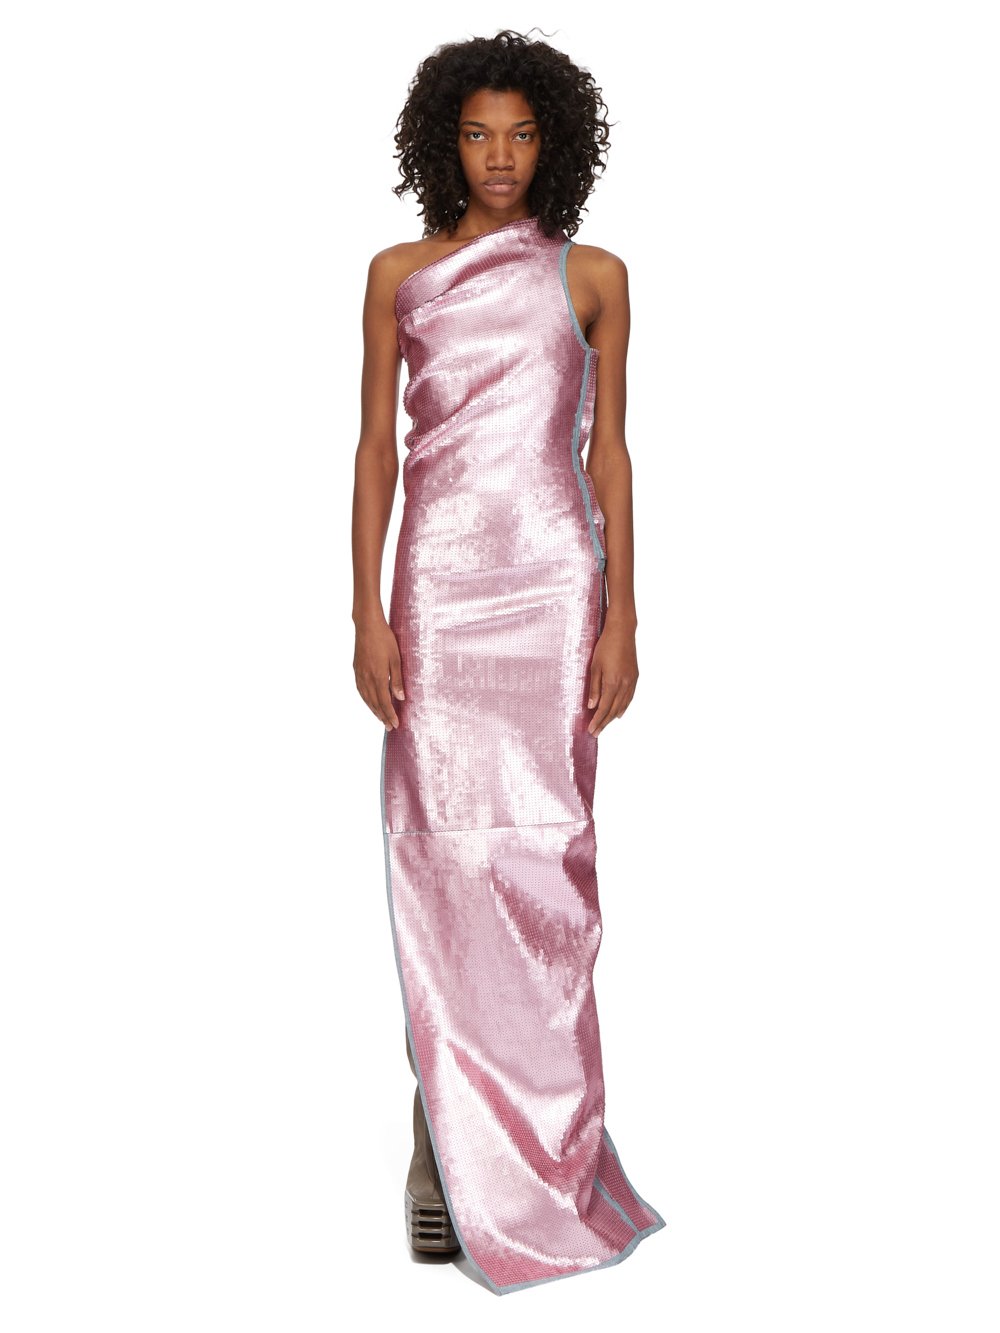 RICK OWENS FW23 LUXOR RUNWAY ATHENA GOWN IN BLUE AND PINK SEQUIN EMBROIDERED STRETCH DENIM